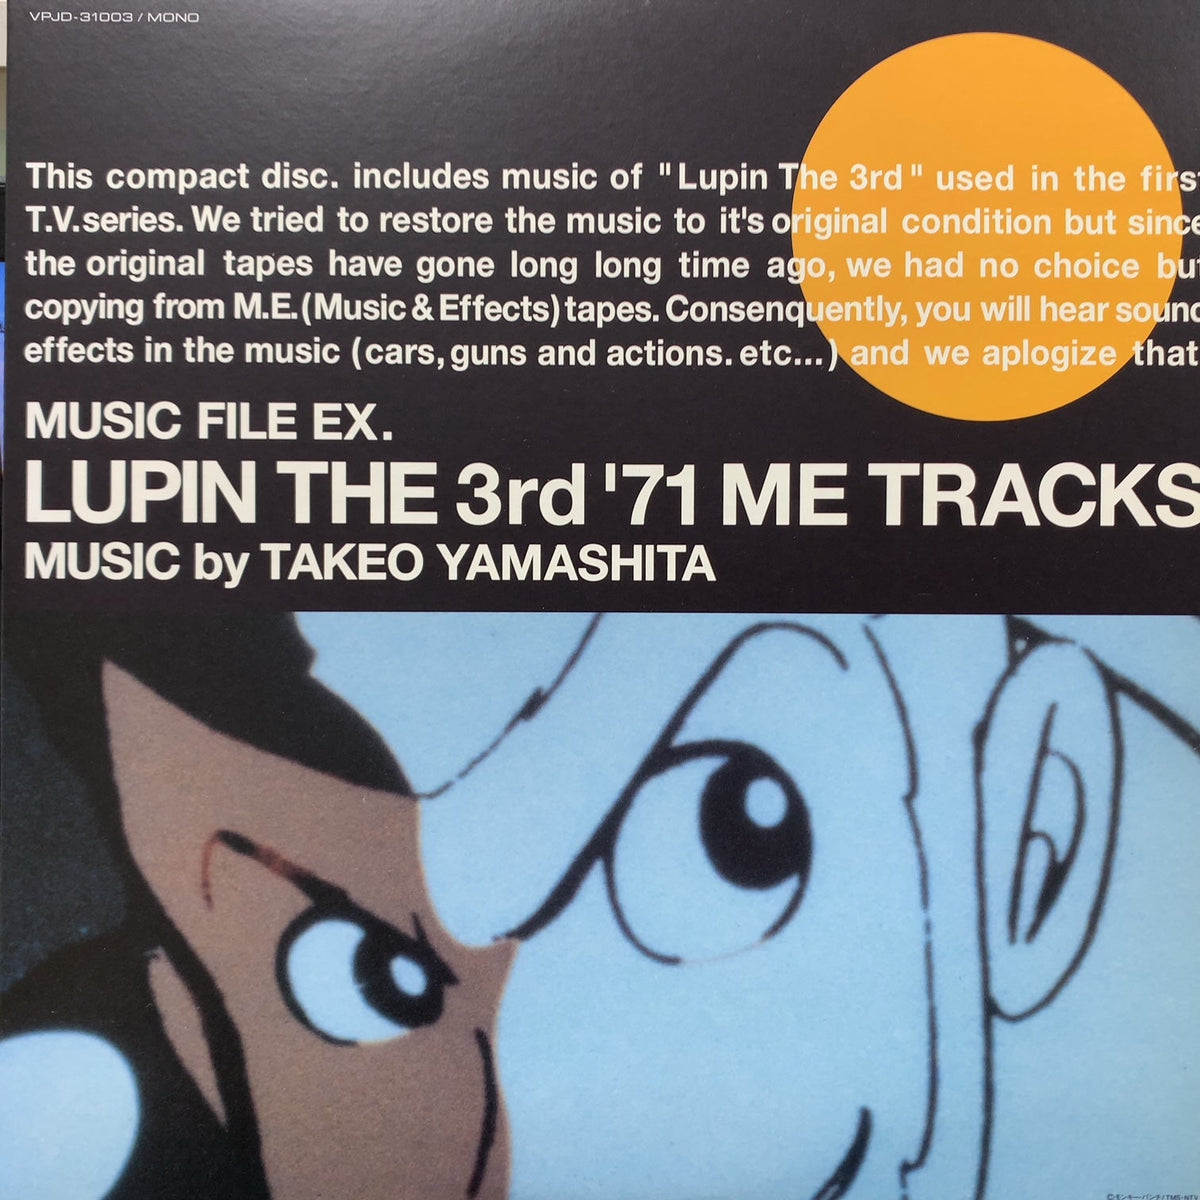 O.S.T. (山下毅雄) / Lupin The 3rd '71 ME Tracks (VPJD-31003